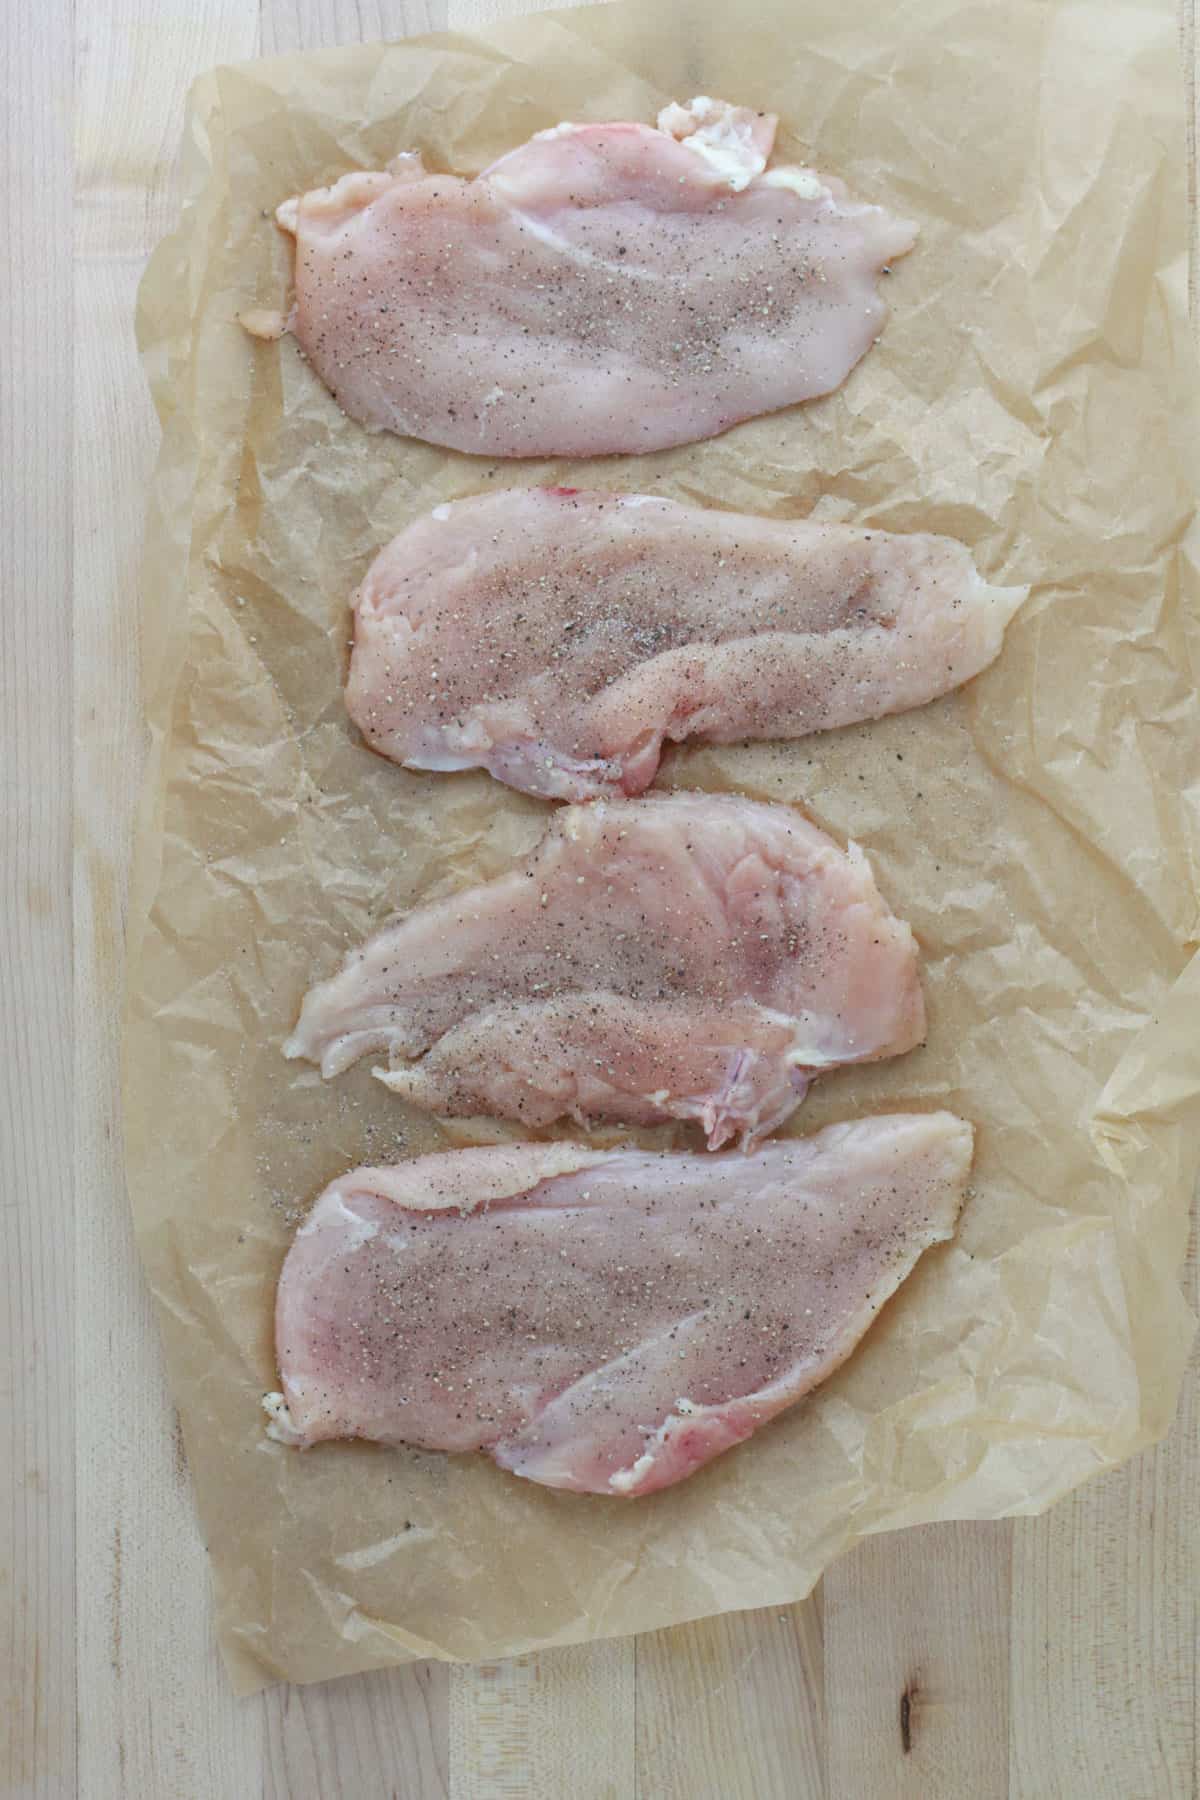 Chicken breasts cut in half crosswise and pounded to a half inch thickness on a piece of parchment paper.